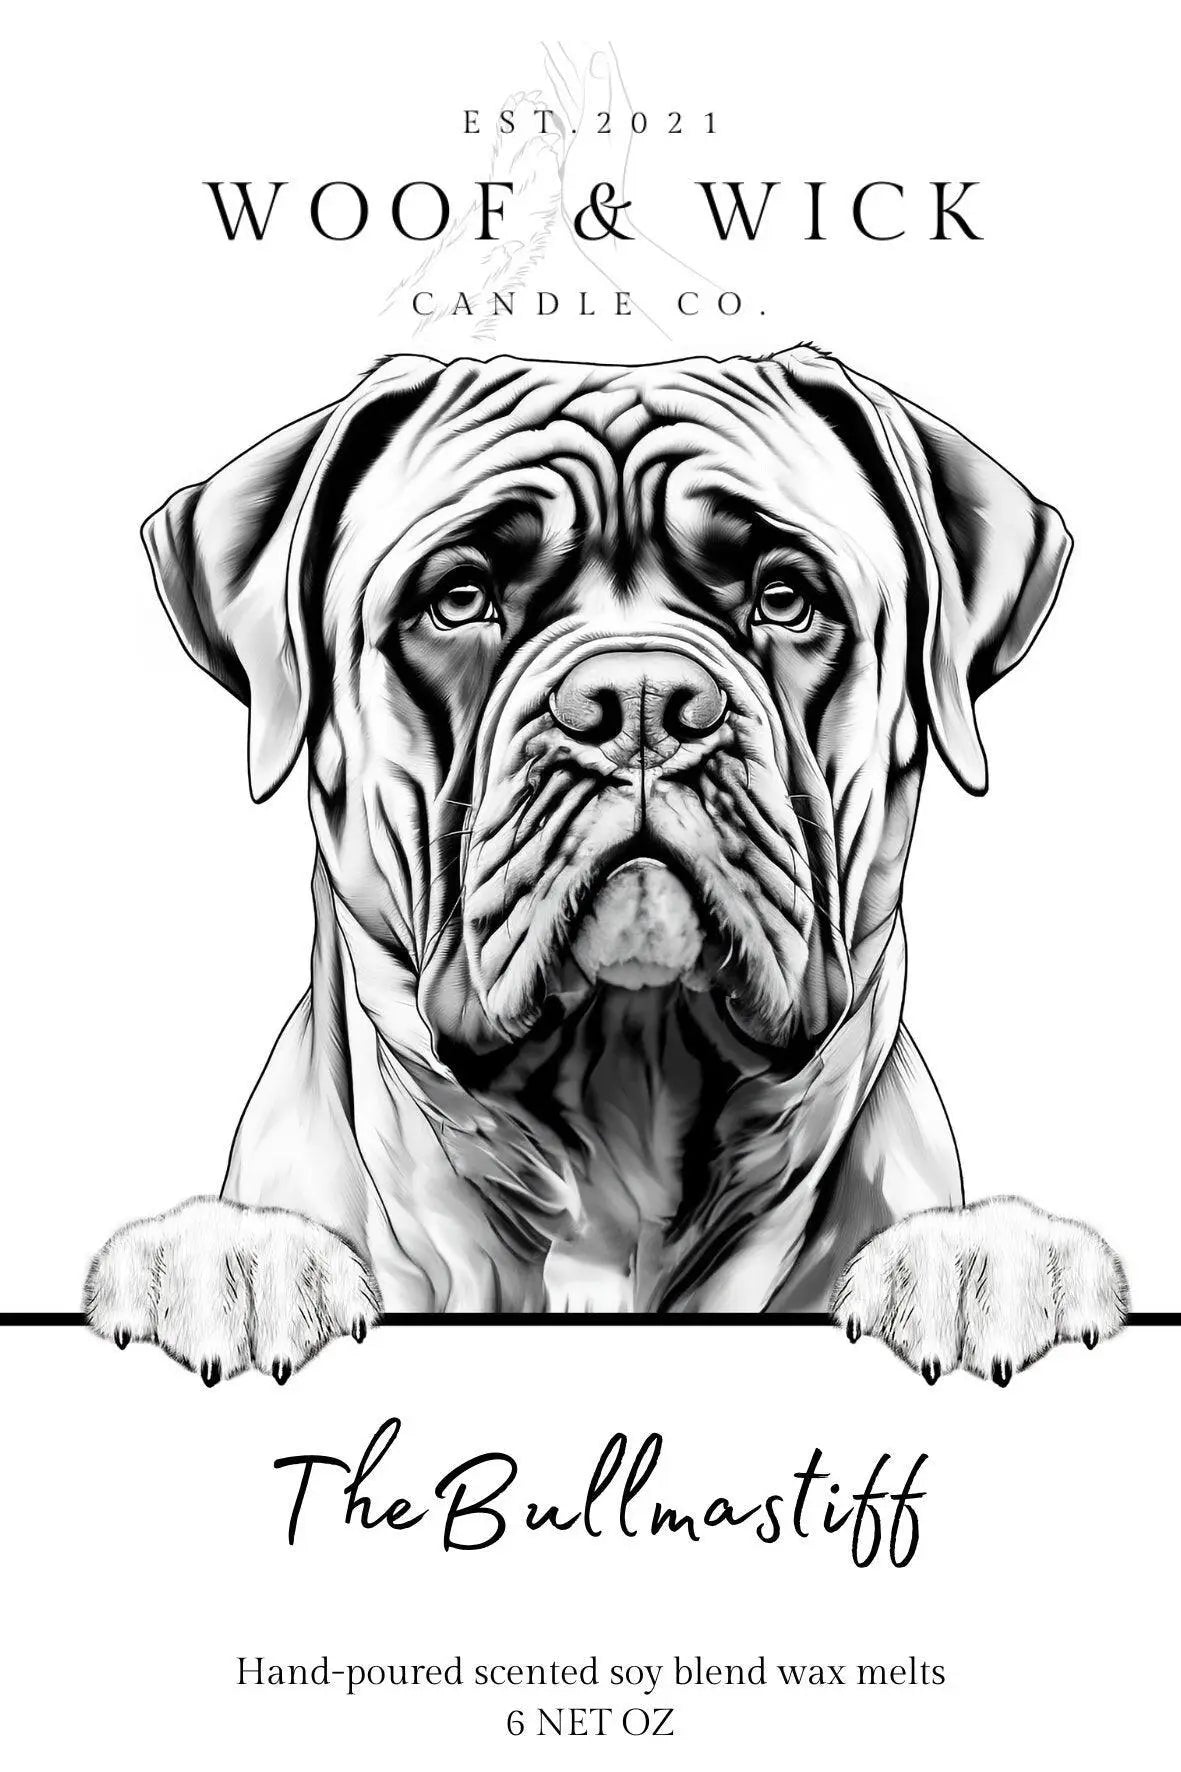 The Bull Mastiff - Personalized Dog Breed Soy Wax Melts for Wax Warmers - Woof & Wick Candle Co.